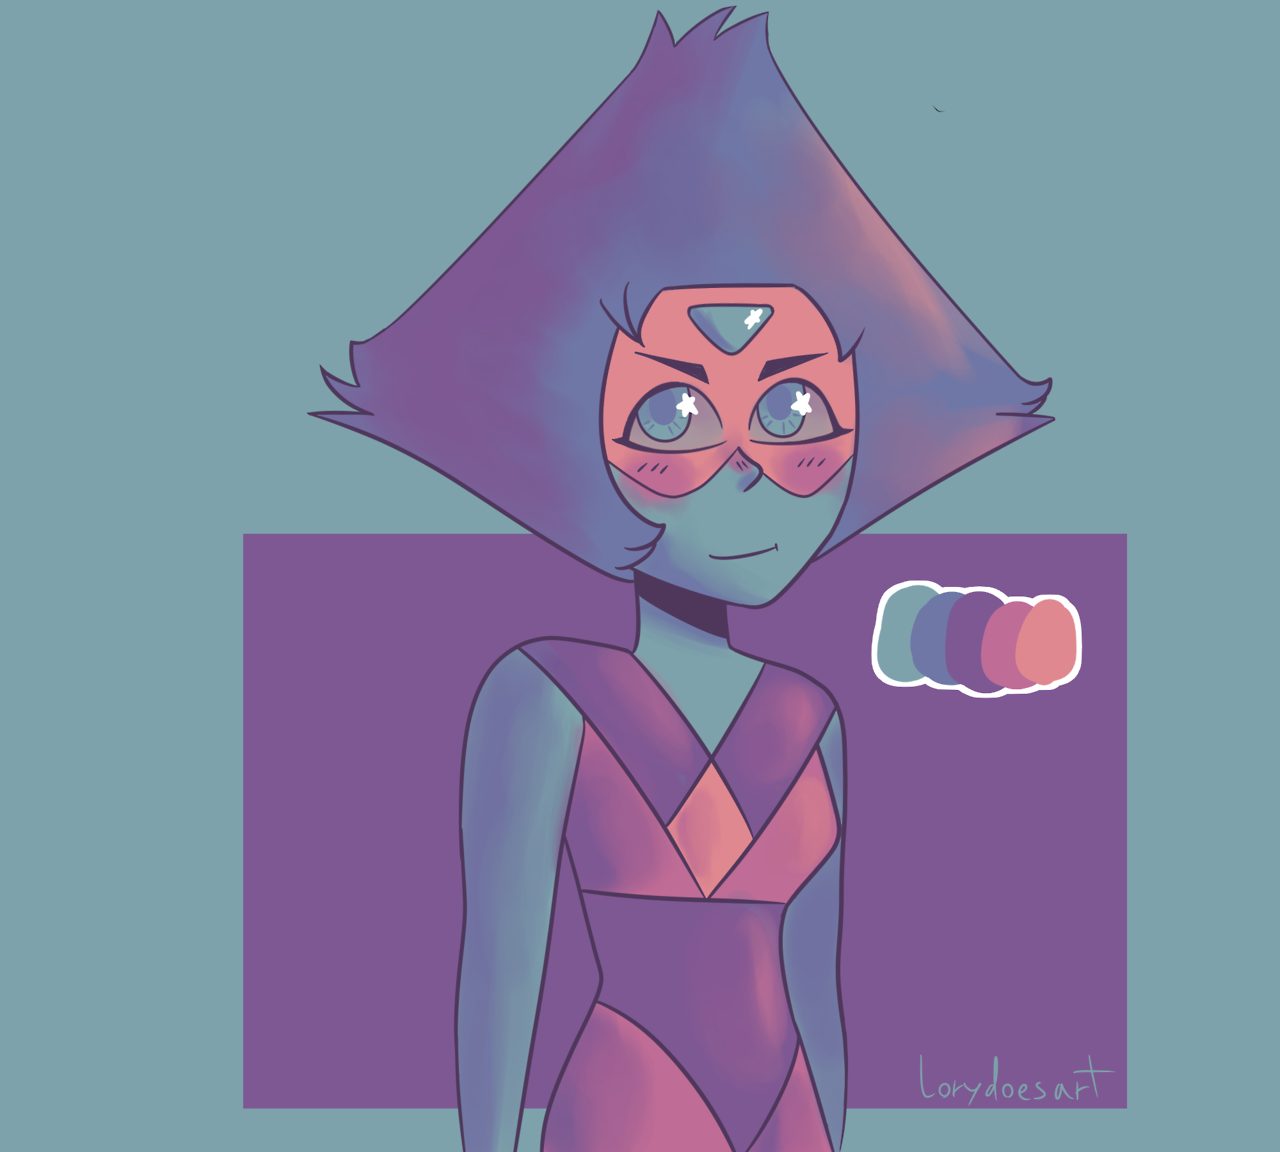 Palette challenge peridot (check my last post for more)